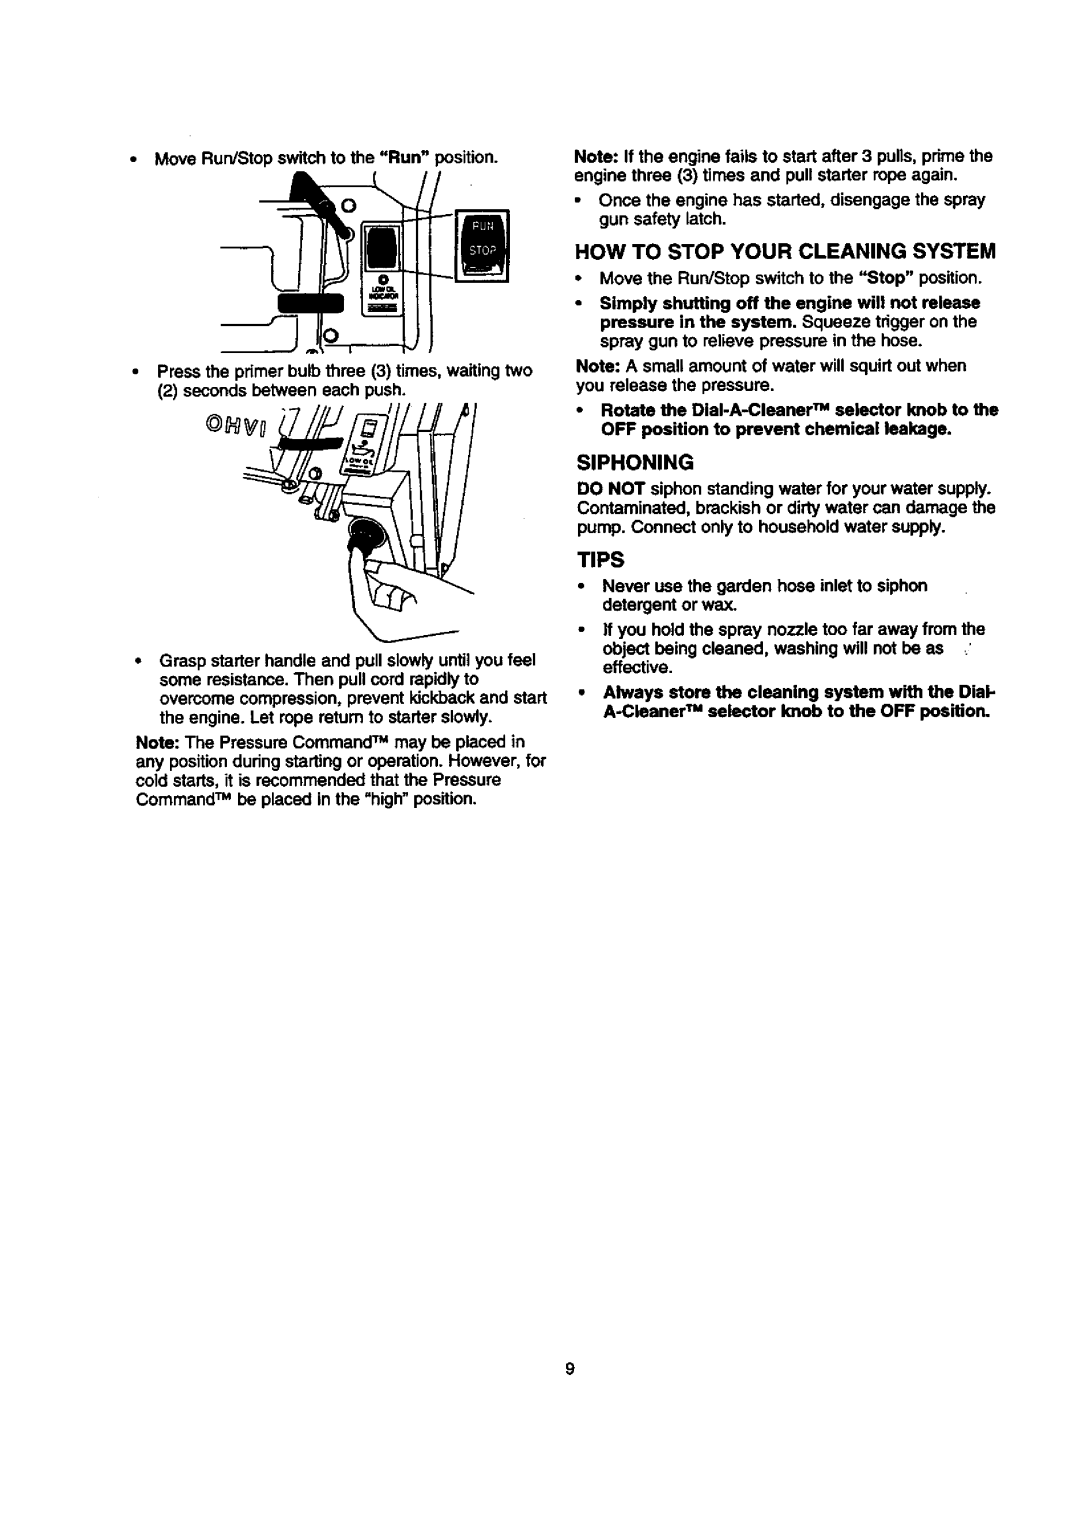 Sears 580.768050 manual How To Stop Your Cleaning System, Siphoning, Tips, Move Run/Stop switch to the Run position 